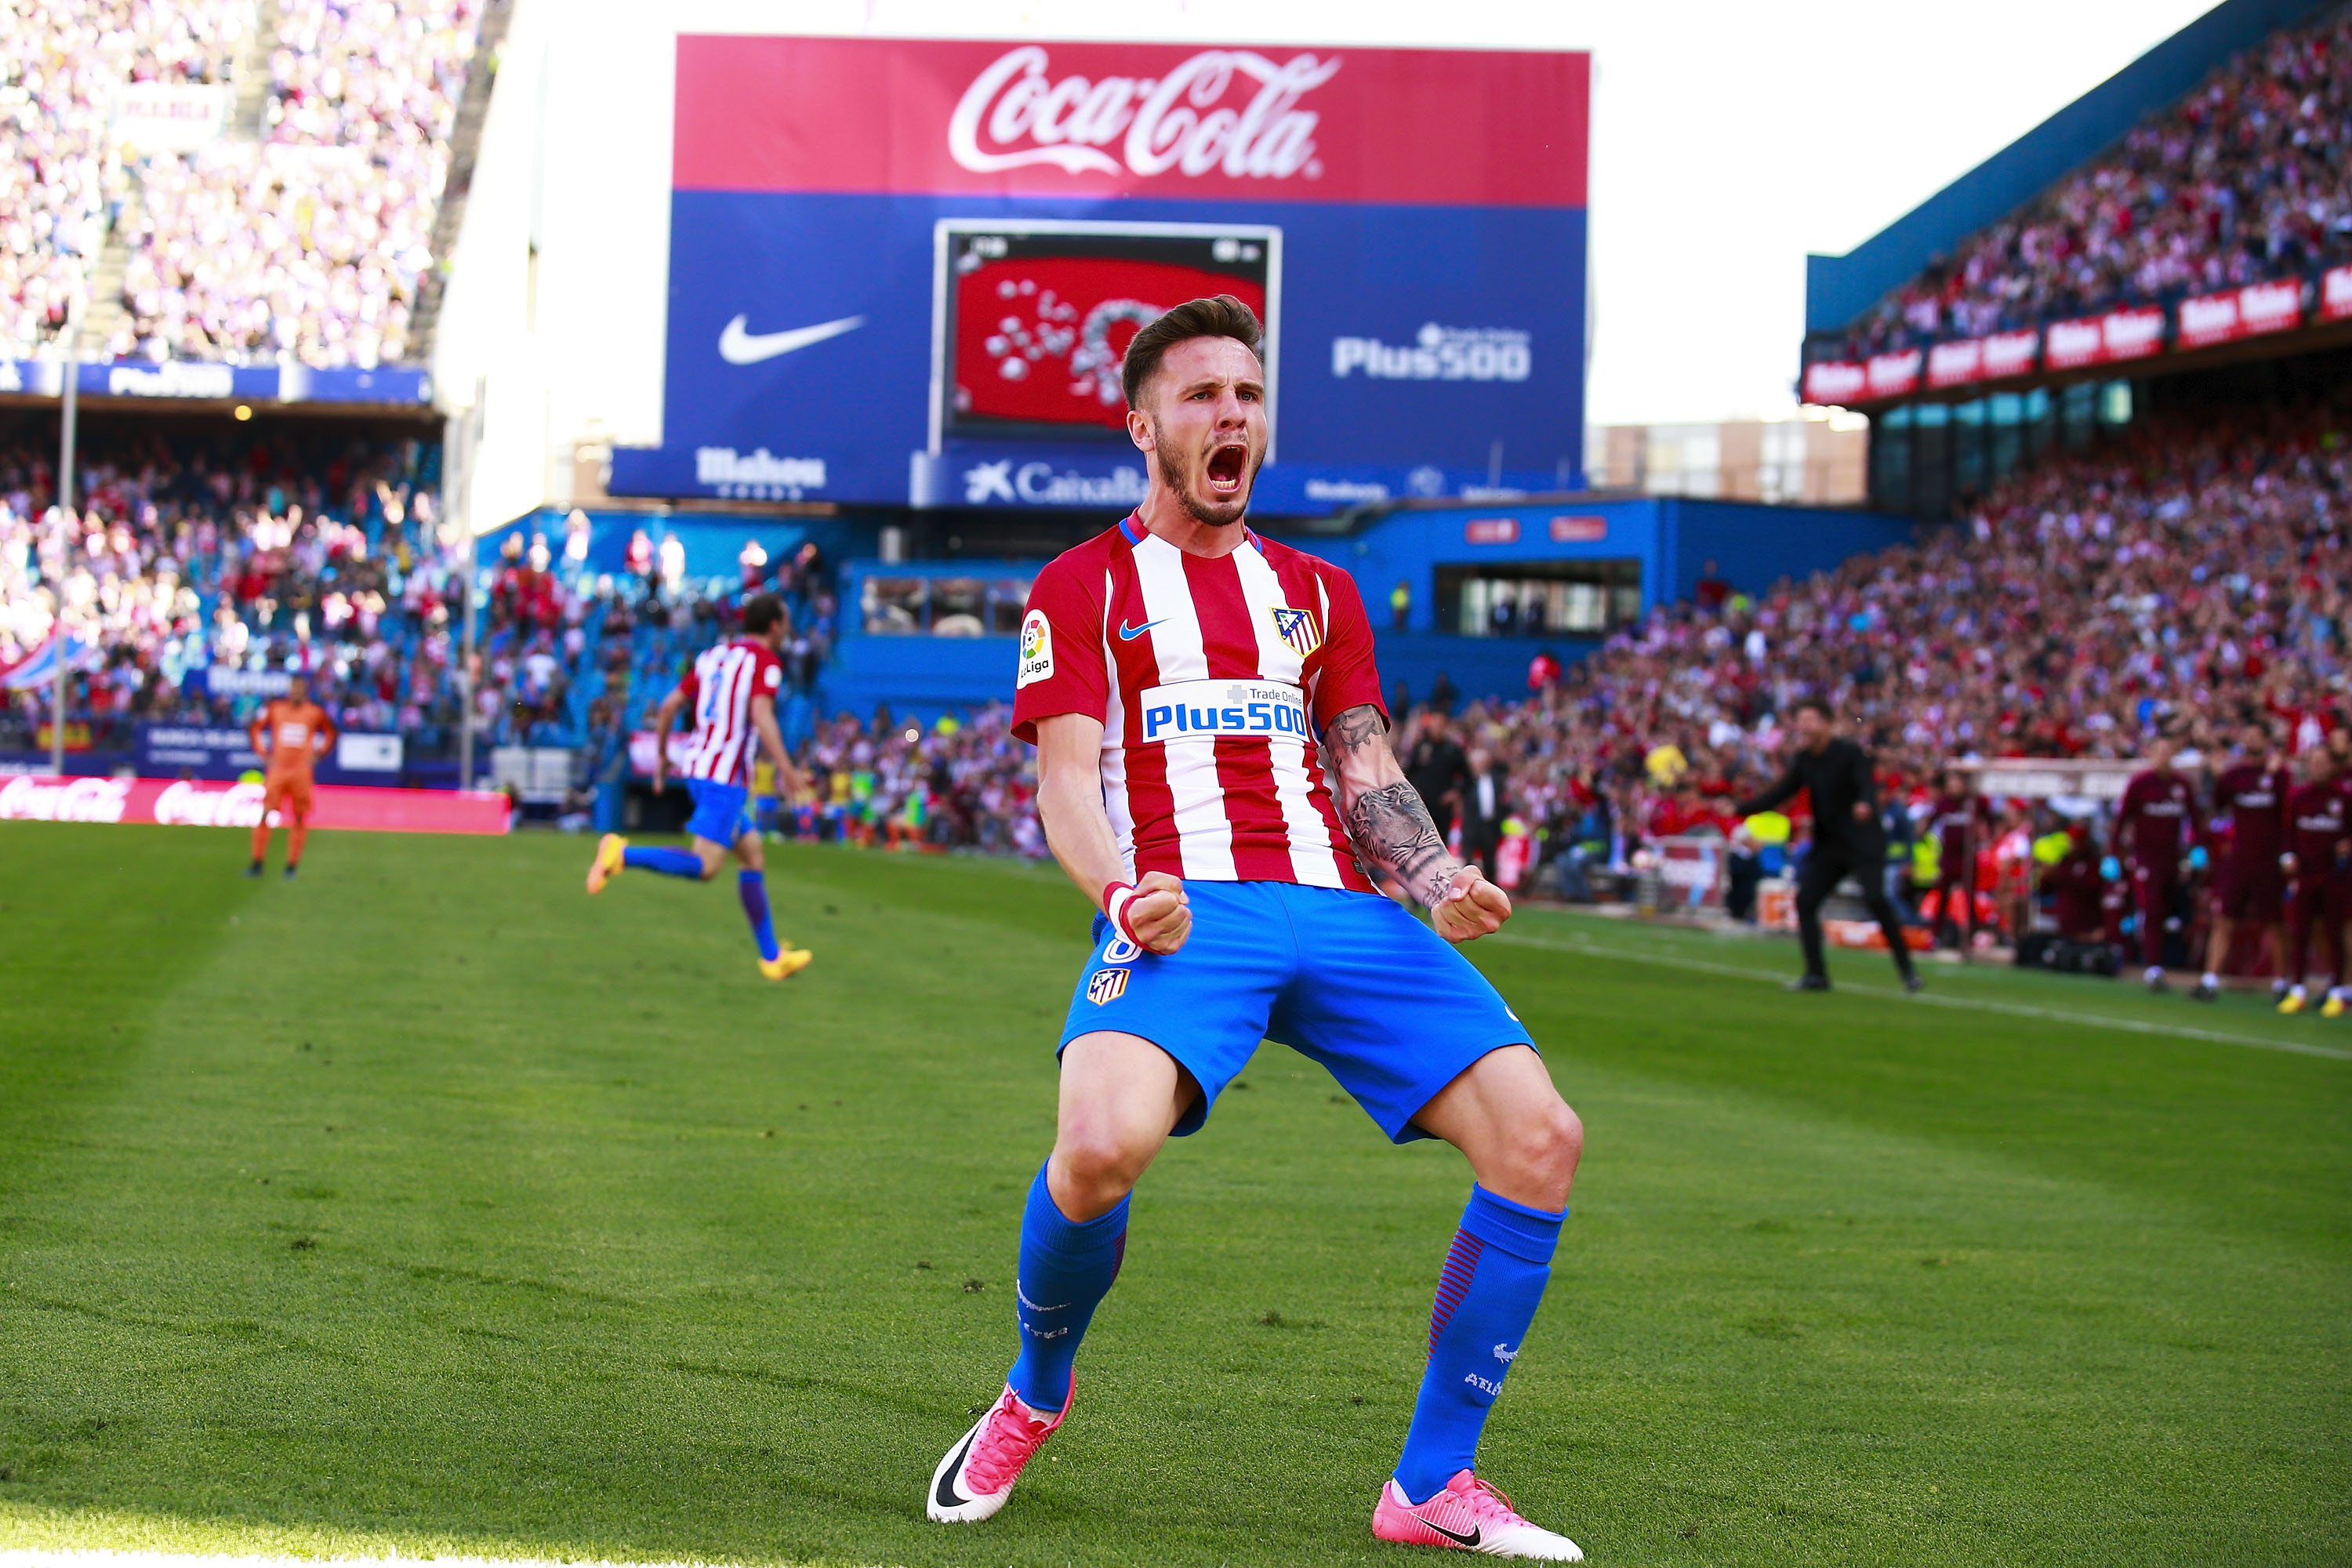 MADRID, SPAIN - MAY 06: Saul Niguez of Atletico de Madrid celebrates scoring their opening goal during the La Liga match between Club Atletico de Madrid and SD Eibar at Estadio Vicente Calderon on May 6, 2017 in Madrid, Spain.  (Photo by Gonzalo Arroyo Moreno/Getty Images)